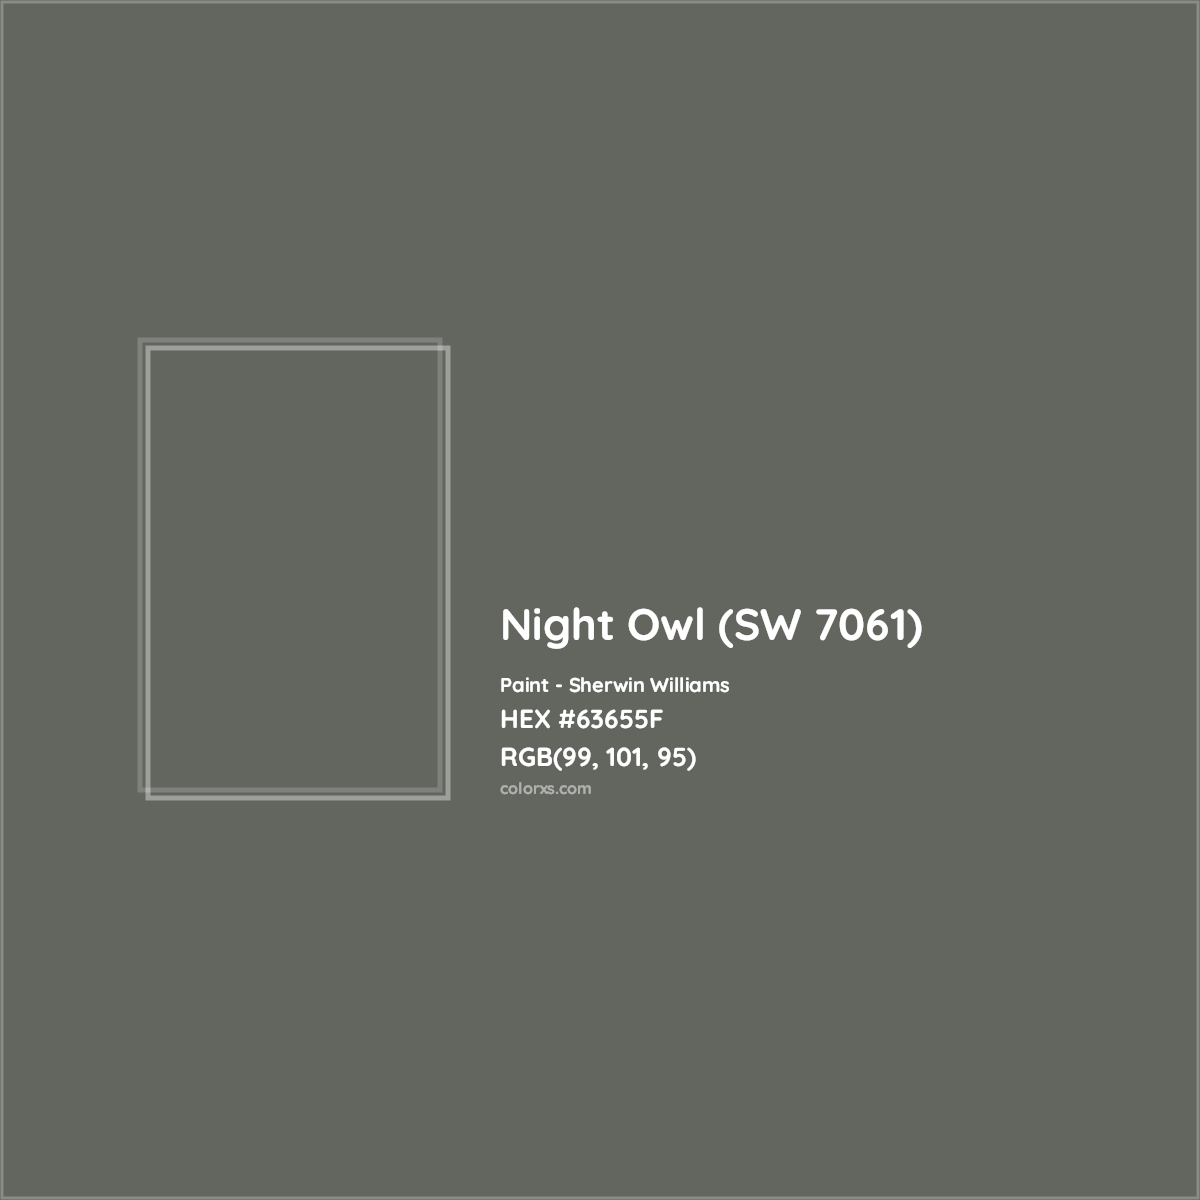 HEX #63655F Night Owl (SW 7061) Paint Sherwin Williams - Color Code